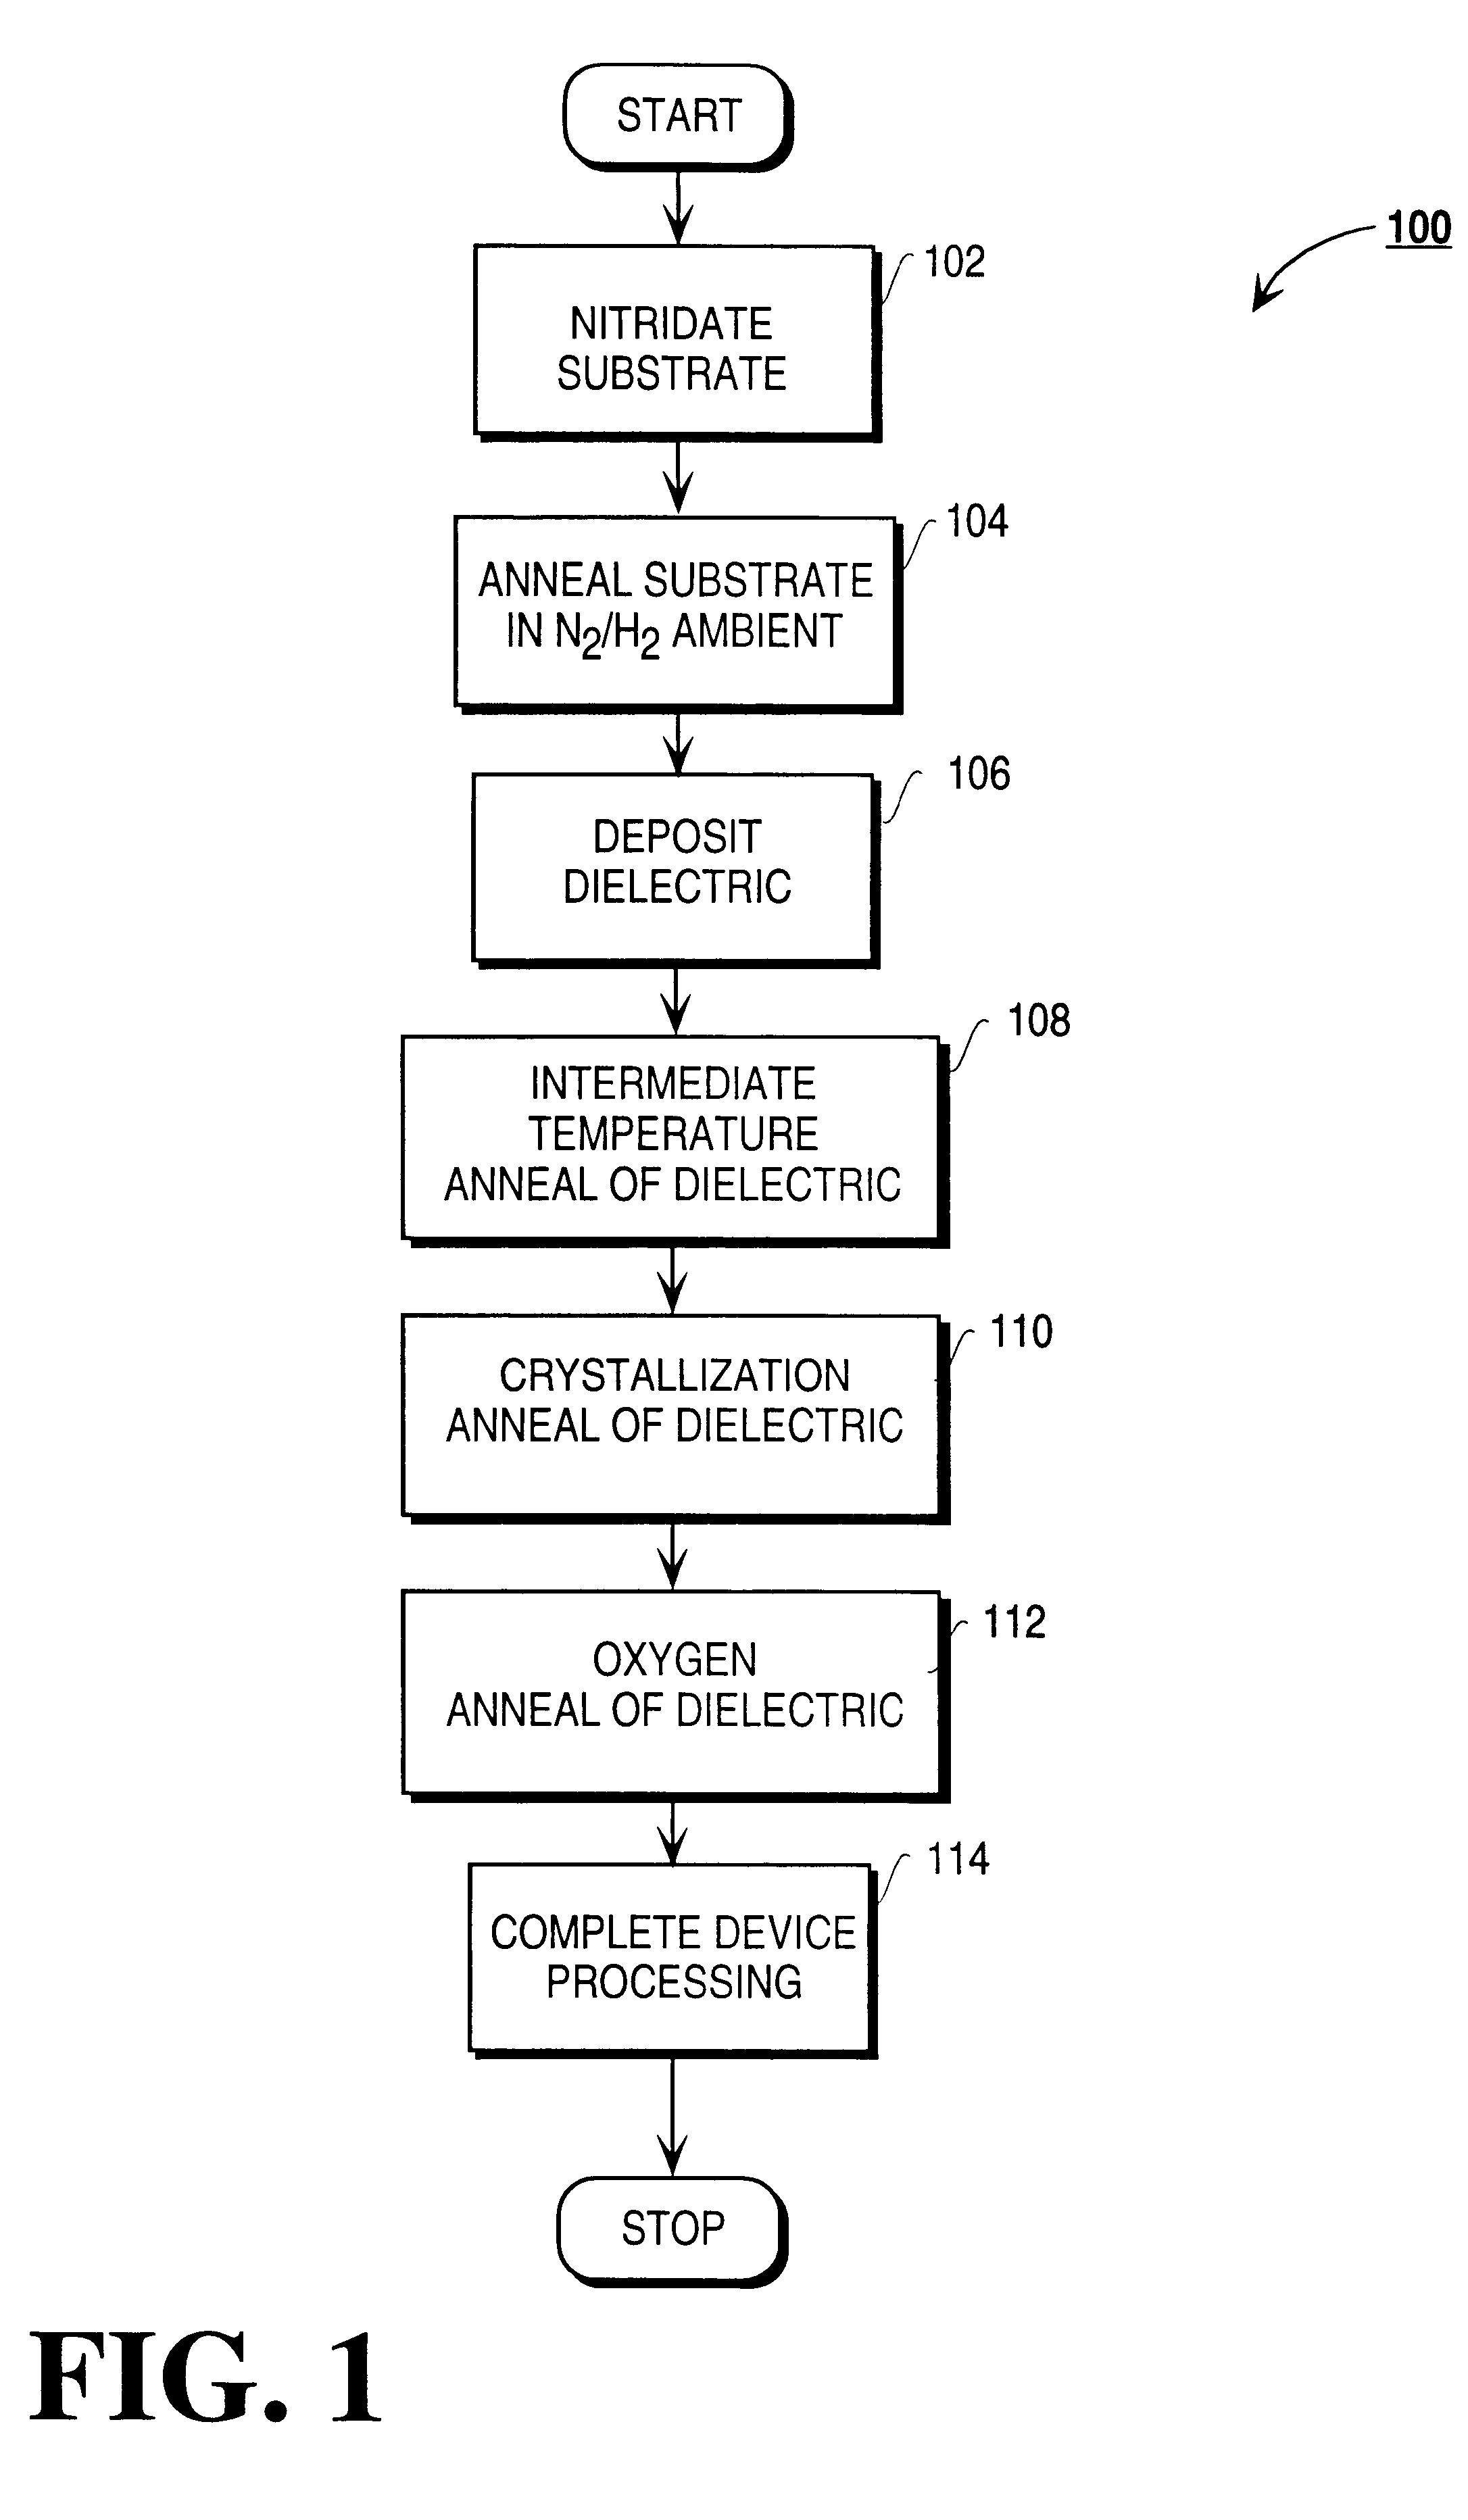 Post deposition treatment of dielectric films for interface control